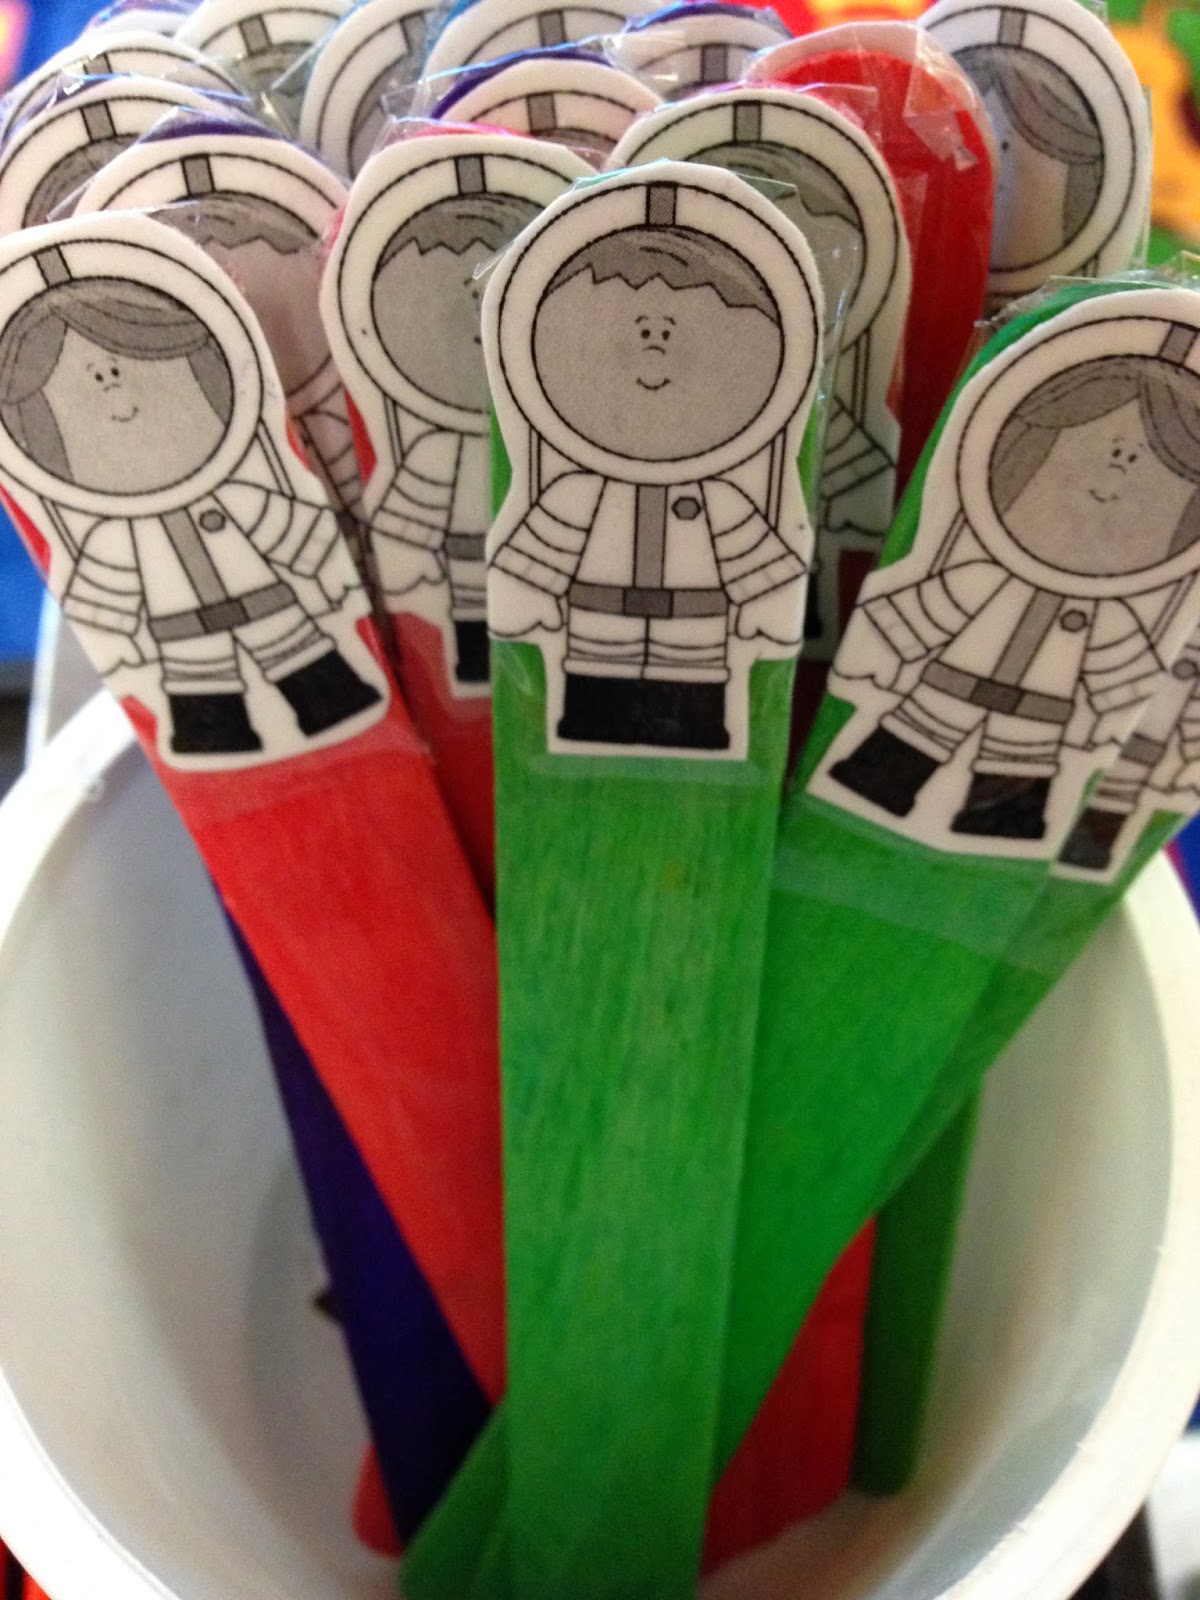 Space People: helps create spaces between the words when writing.